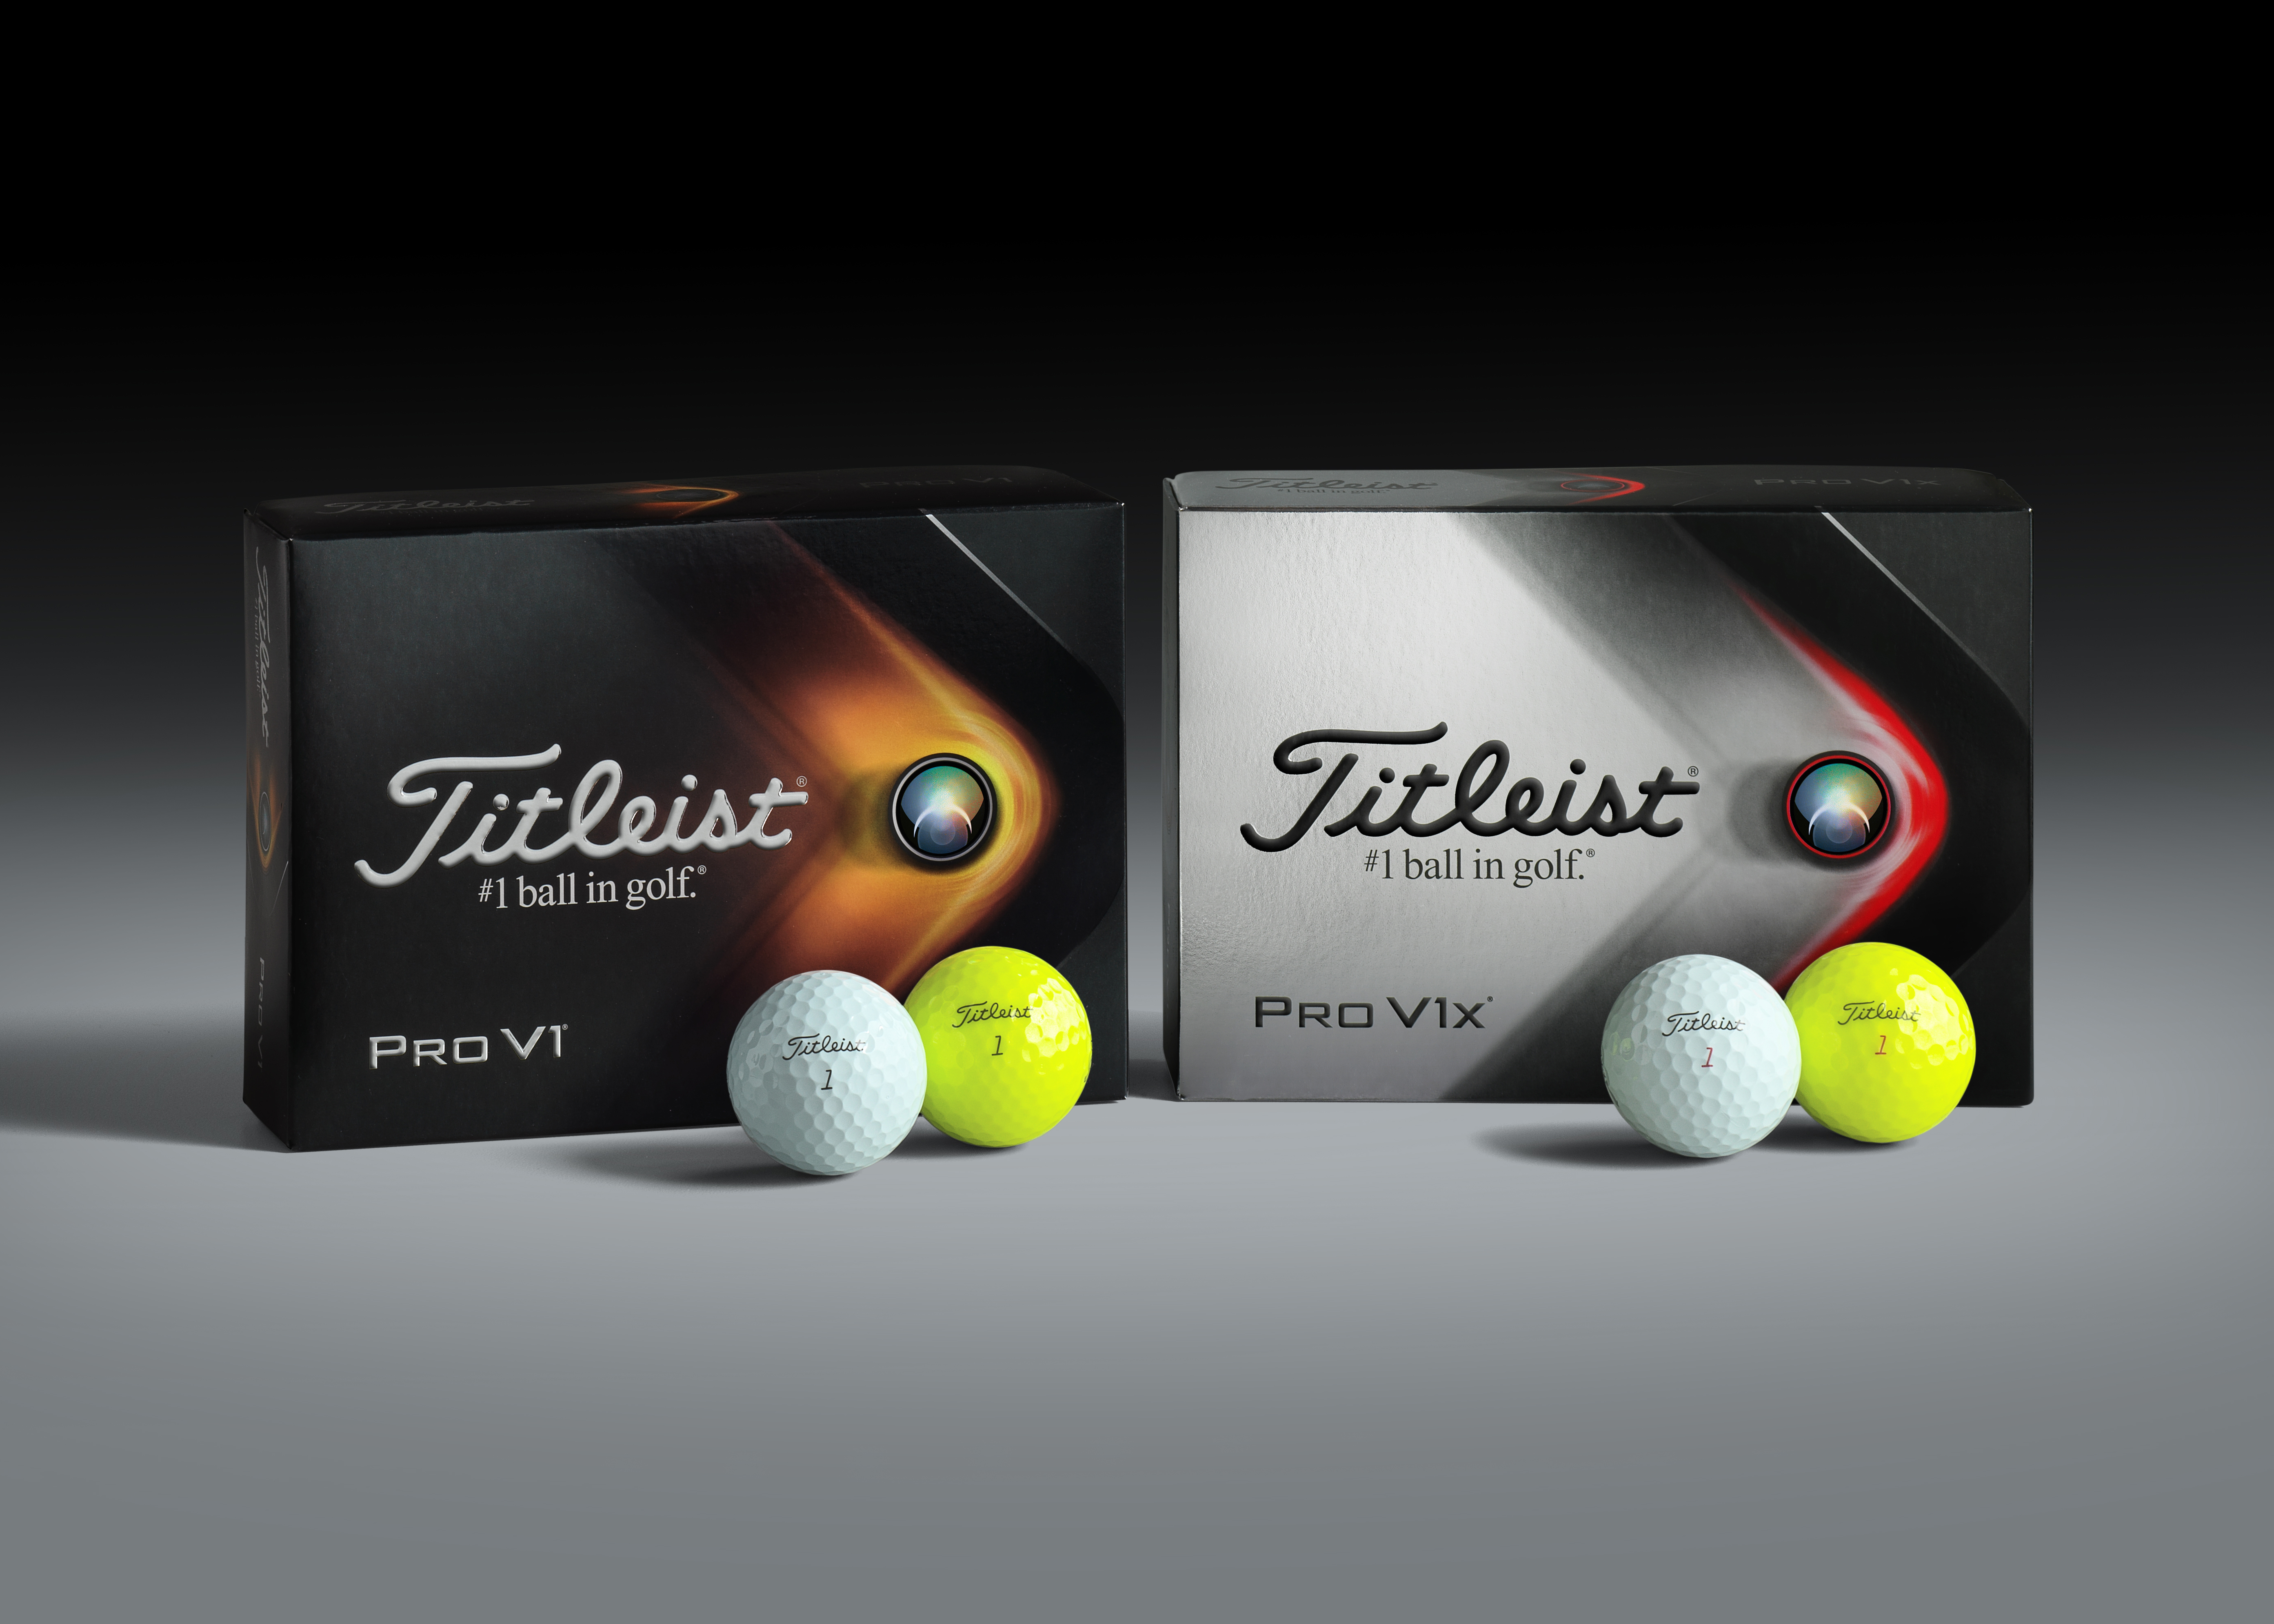 Titleist's new Pro V1 and Pro V1x balls feature a dimple pattern 